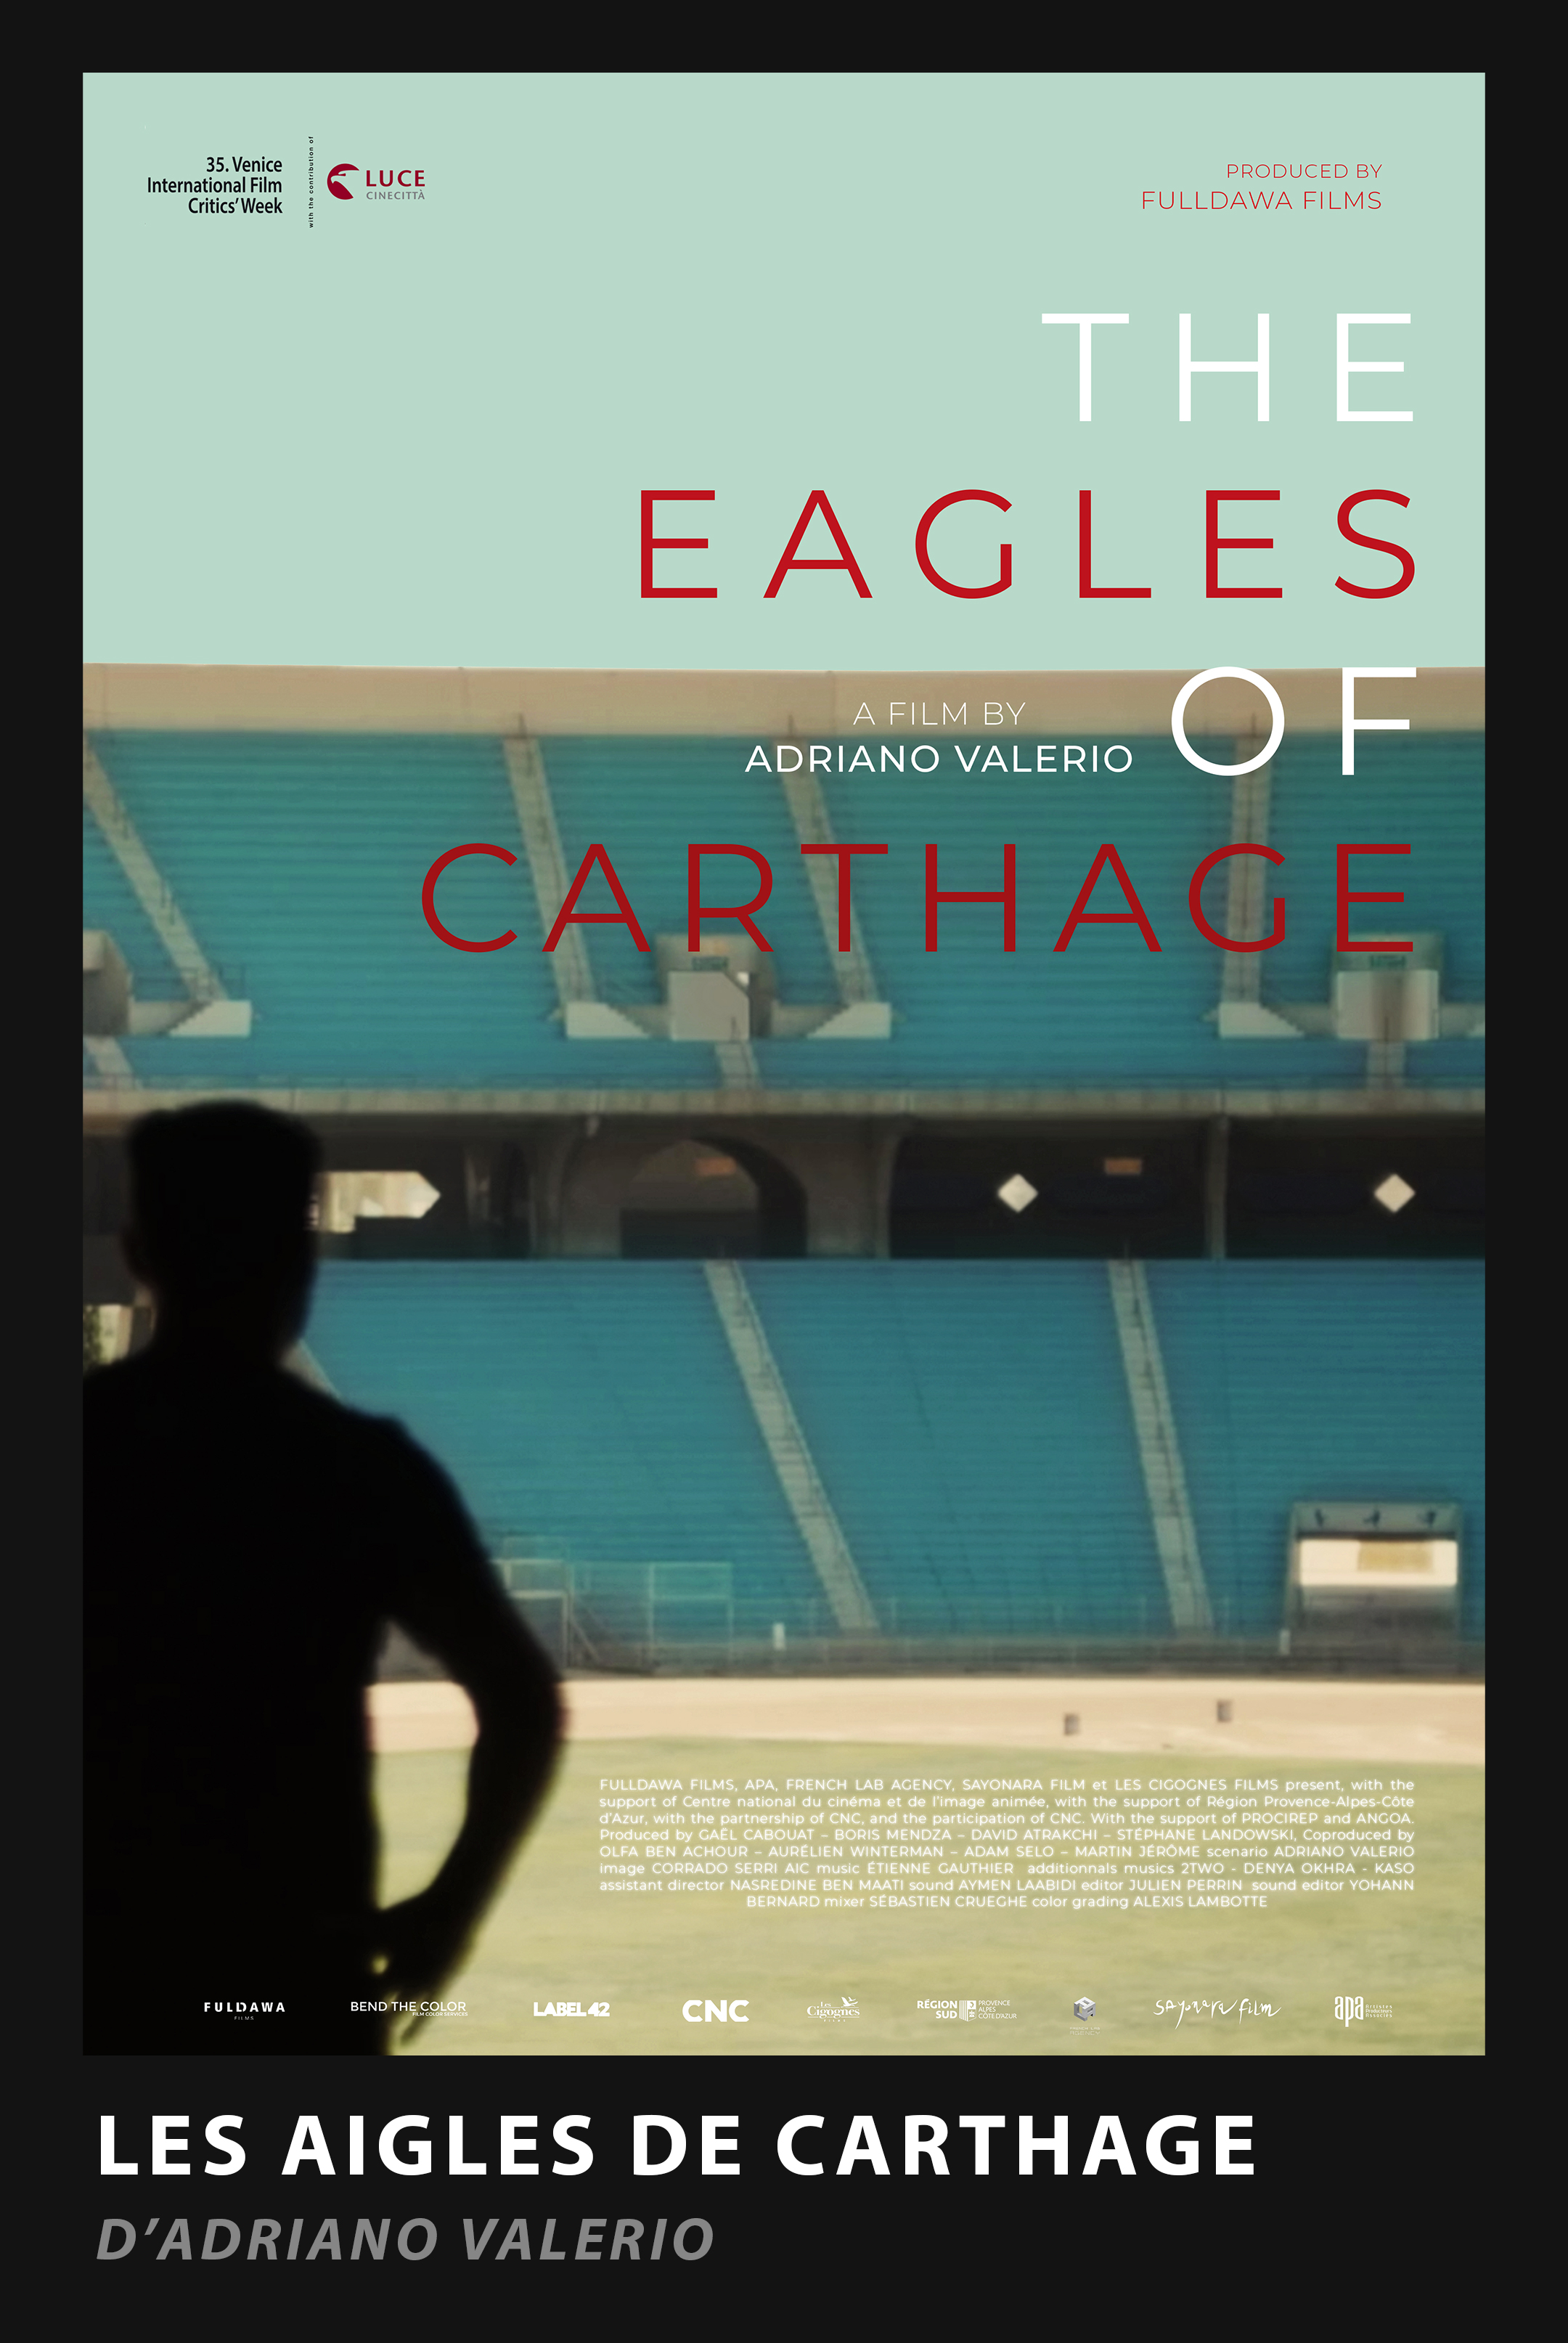 THE EAGLES OF CARTHAGE